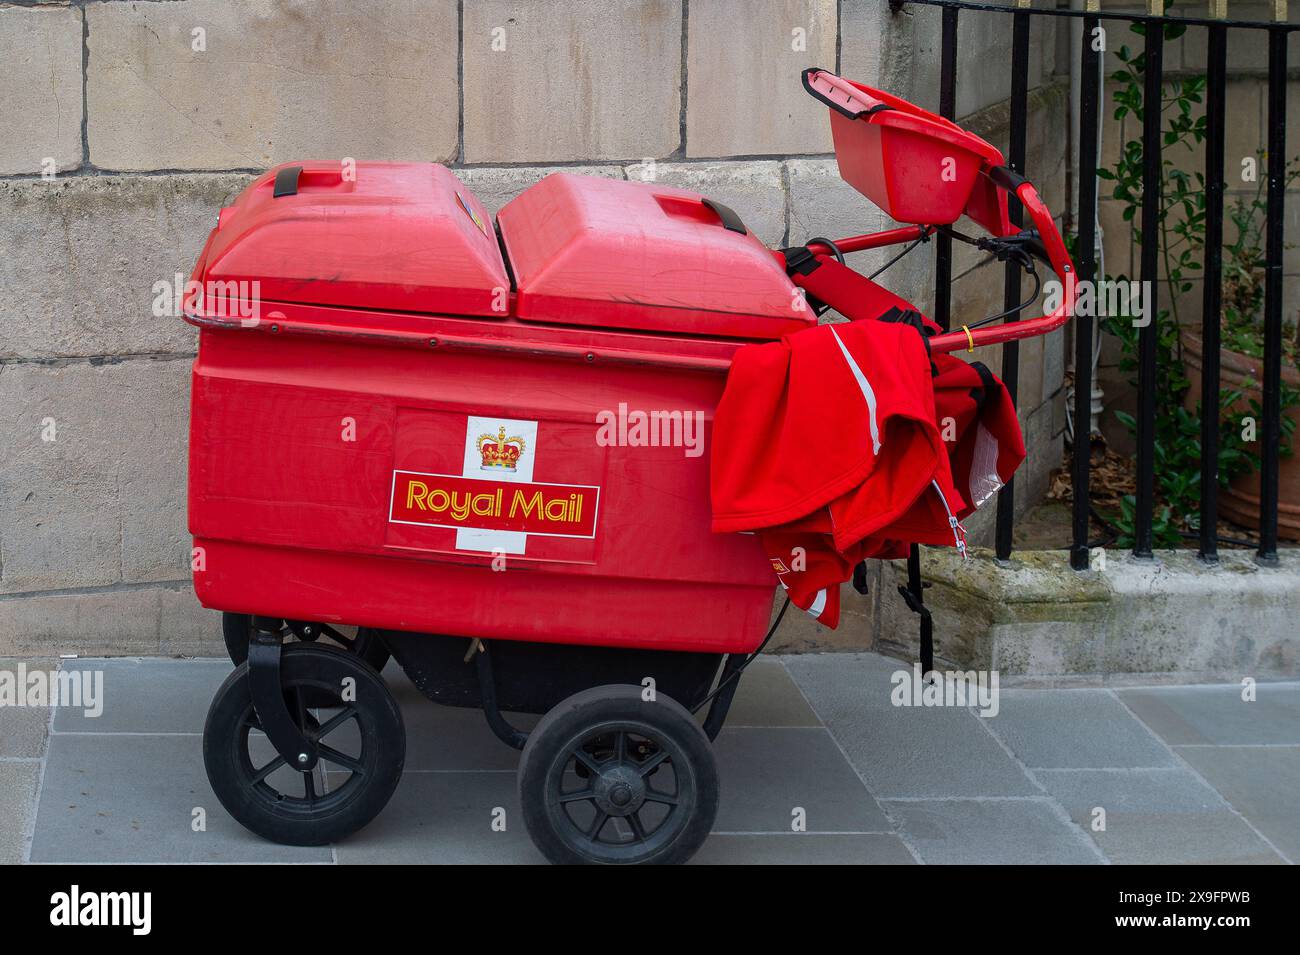 Windsor, UK. 31st May, 2024. A Royal Mail post cart in Windsor, Berkshire. The owner of Royal Mail, International Distribution Services, has reportedly accepted a £3.5bn takeover bid from a Czech billionaire, Daniel Kretinsky, Kretinsky's EP Group. The sale of Royal Mail, is however, subject to shareholder and Government approval. The National Security and Investment Act 2021, gives Government ministers the power to block the sale of companies that are considered part of critical national infrastructure. Credit: Maureen McLean/Alamy Stock Photo